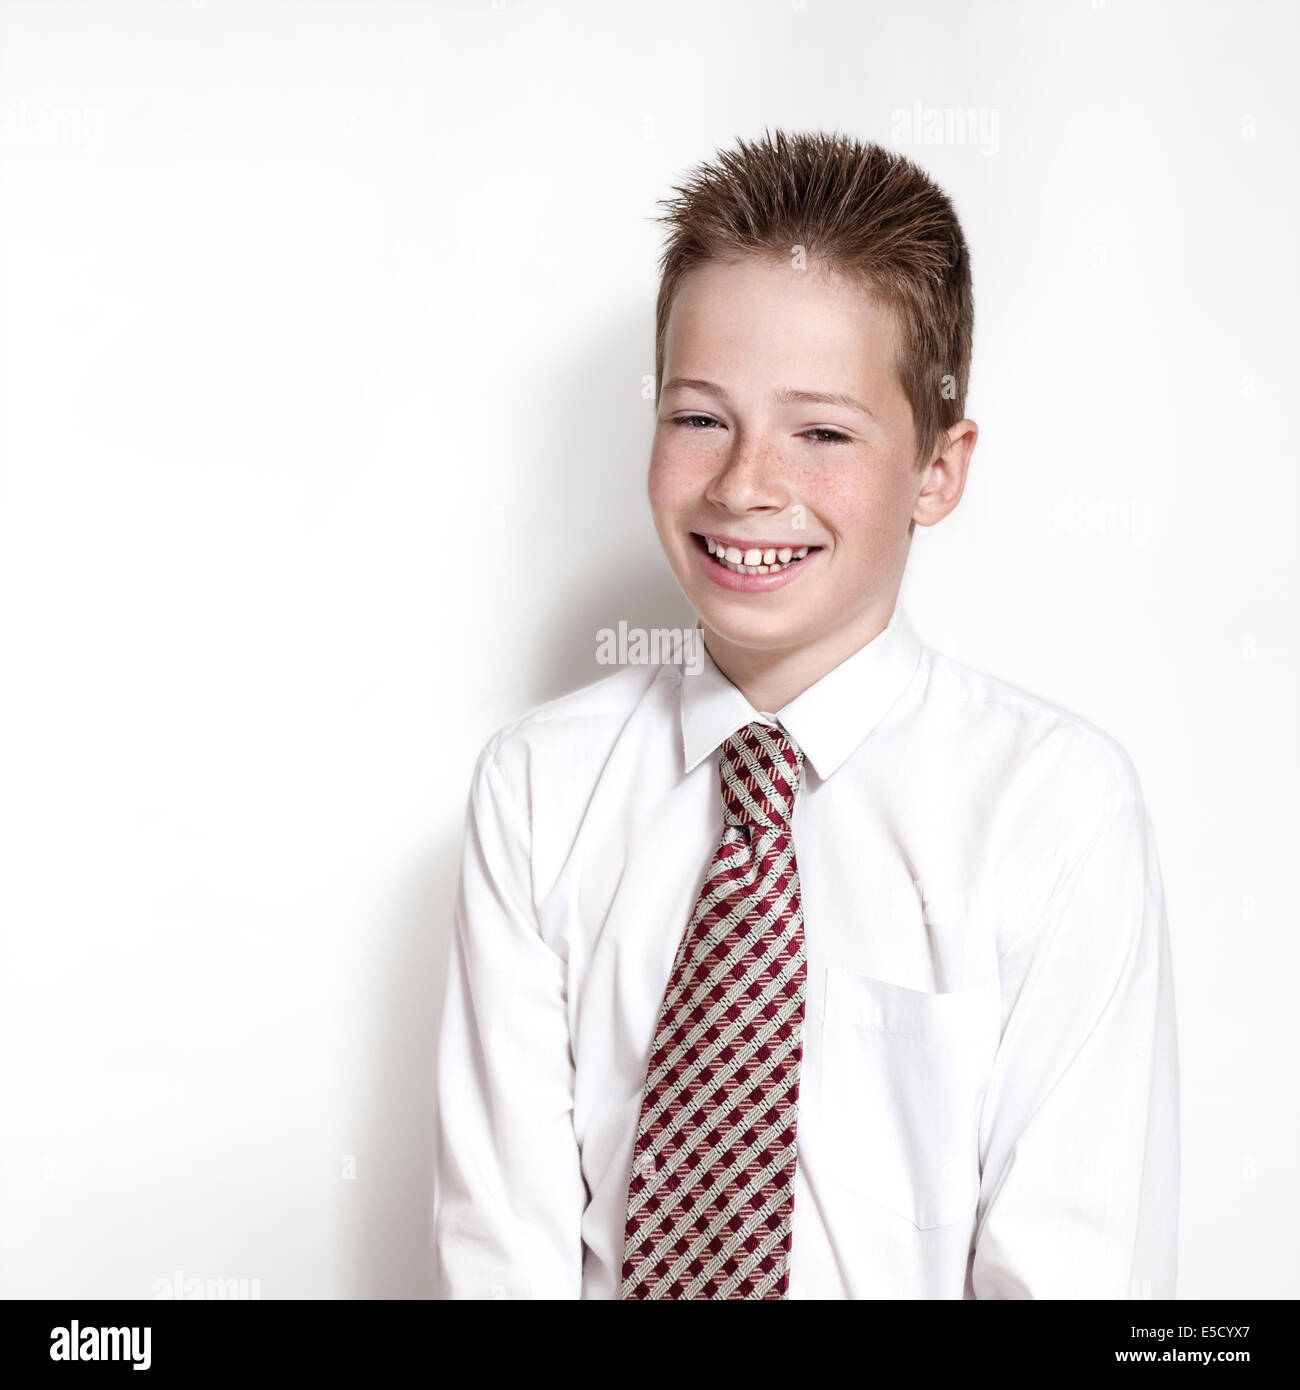 The nice smiling boy teenager in a white shirt and a tie on a gray background with place for text Stock Photo